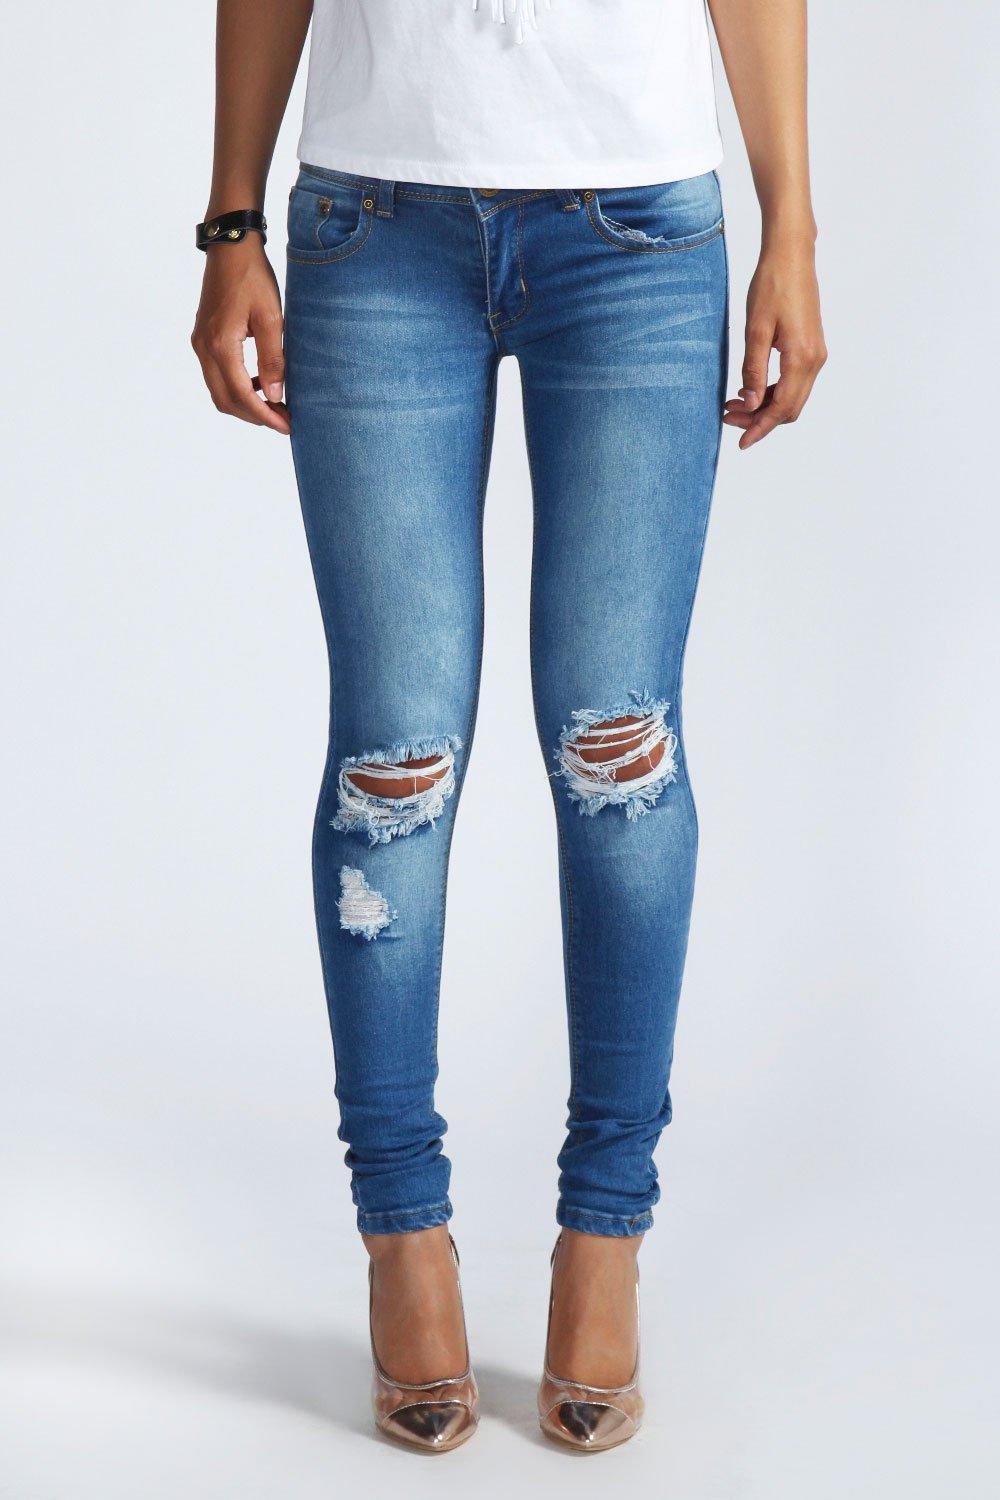 ripped skinny jeans loren distressed rip knee skinny jeans. hover to zoom CJZTKIG